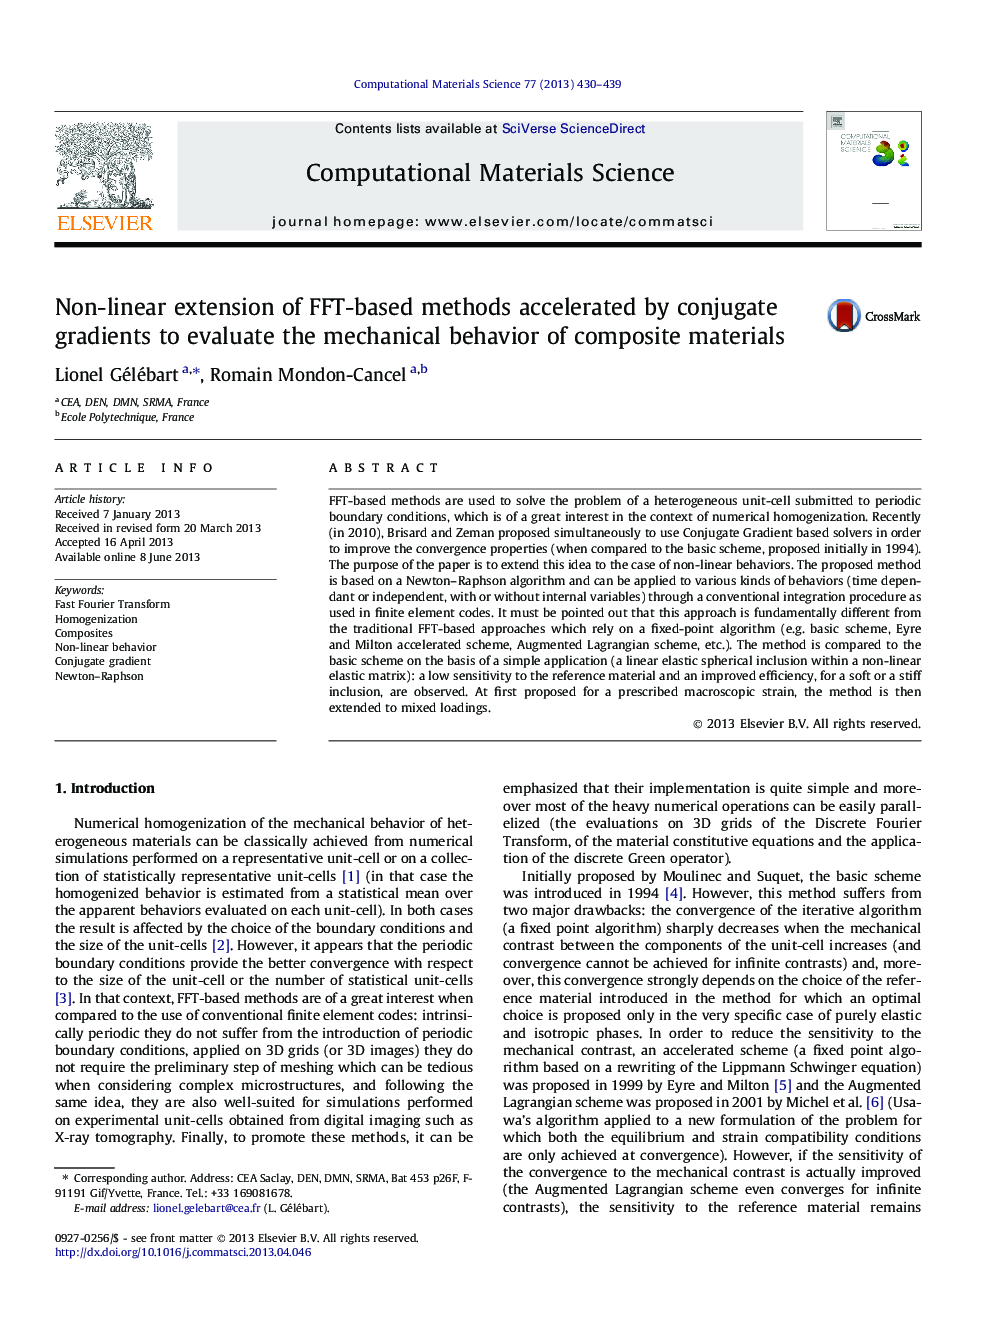 Non-linear extension of FFT-based methods accelerated by conjugate gradients to evaluate the mechanical behavior of composite materials